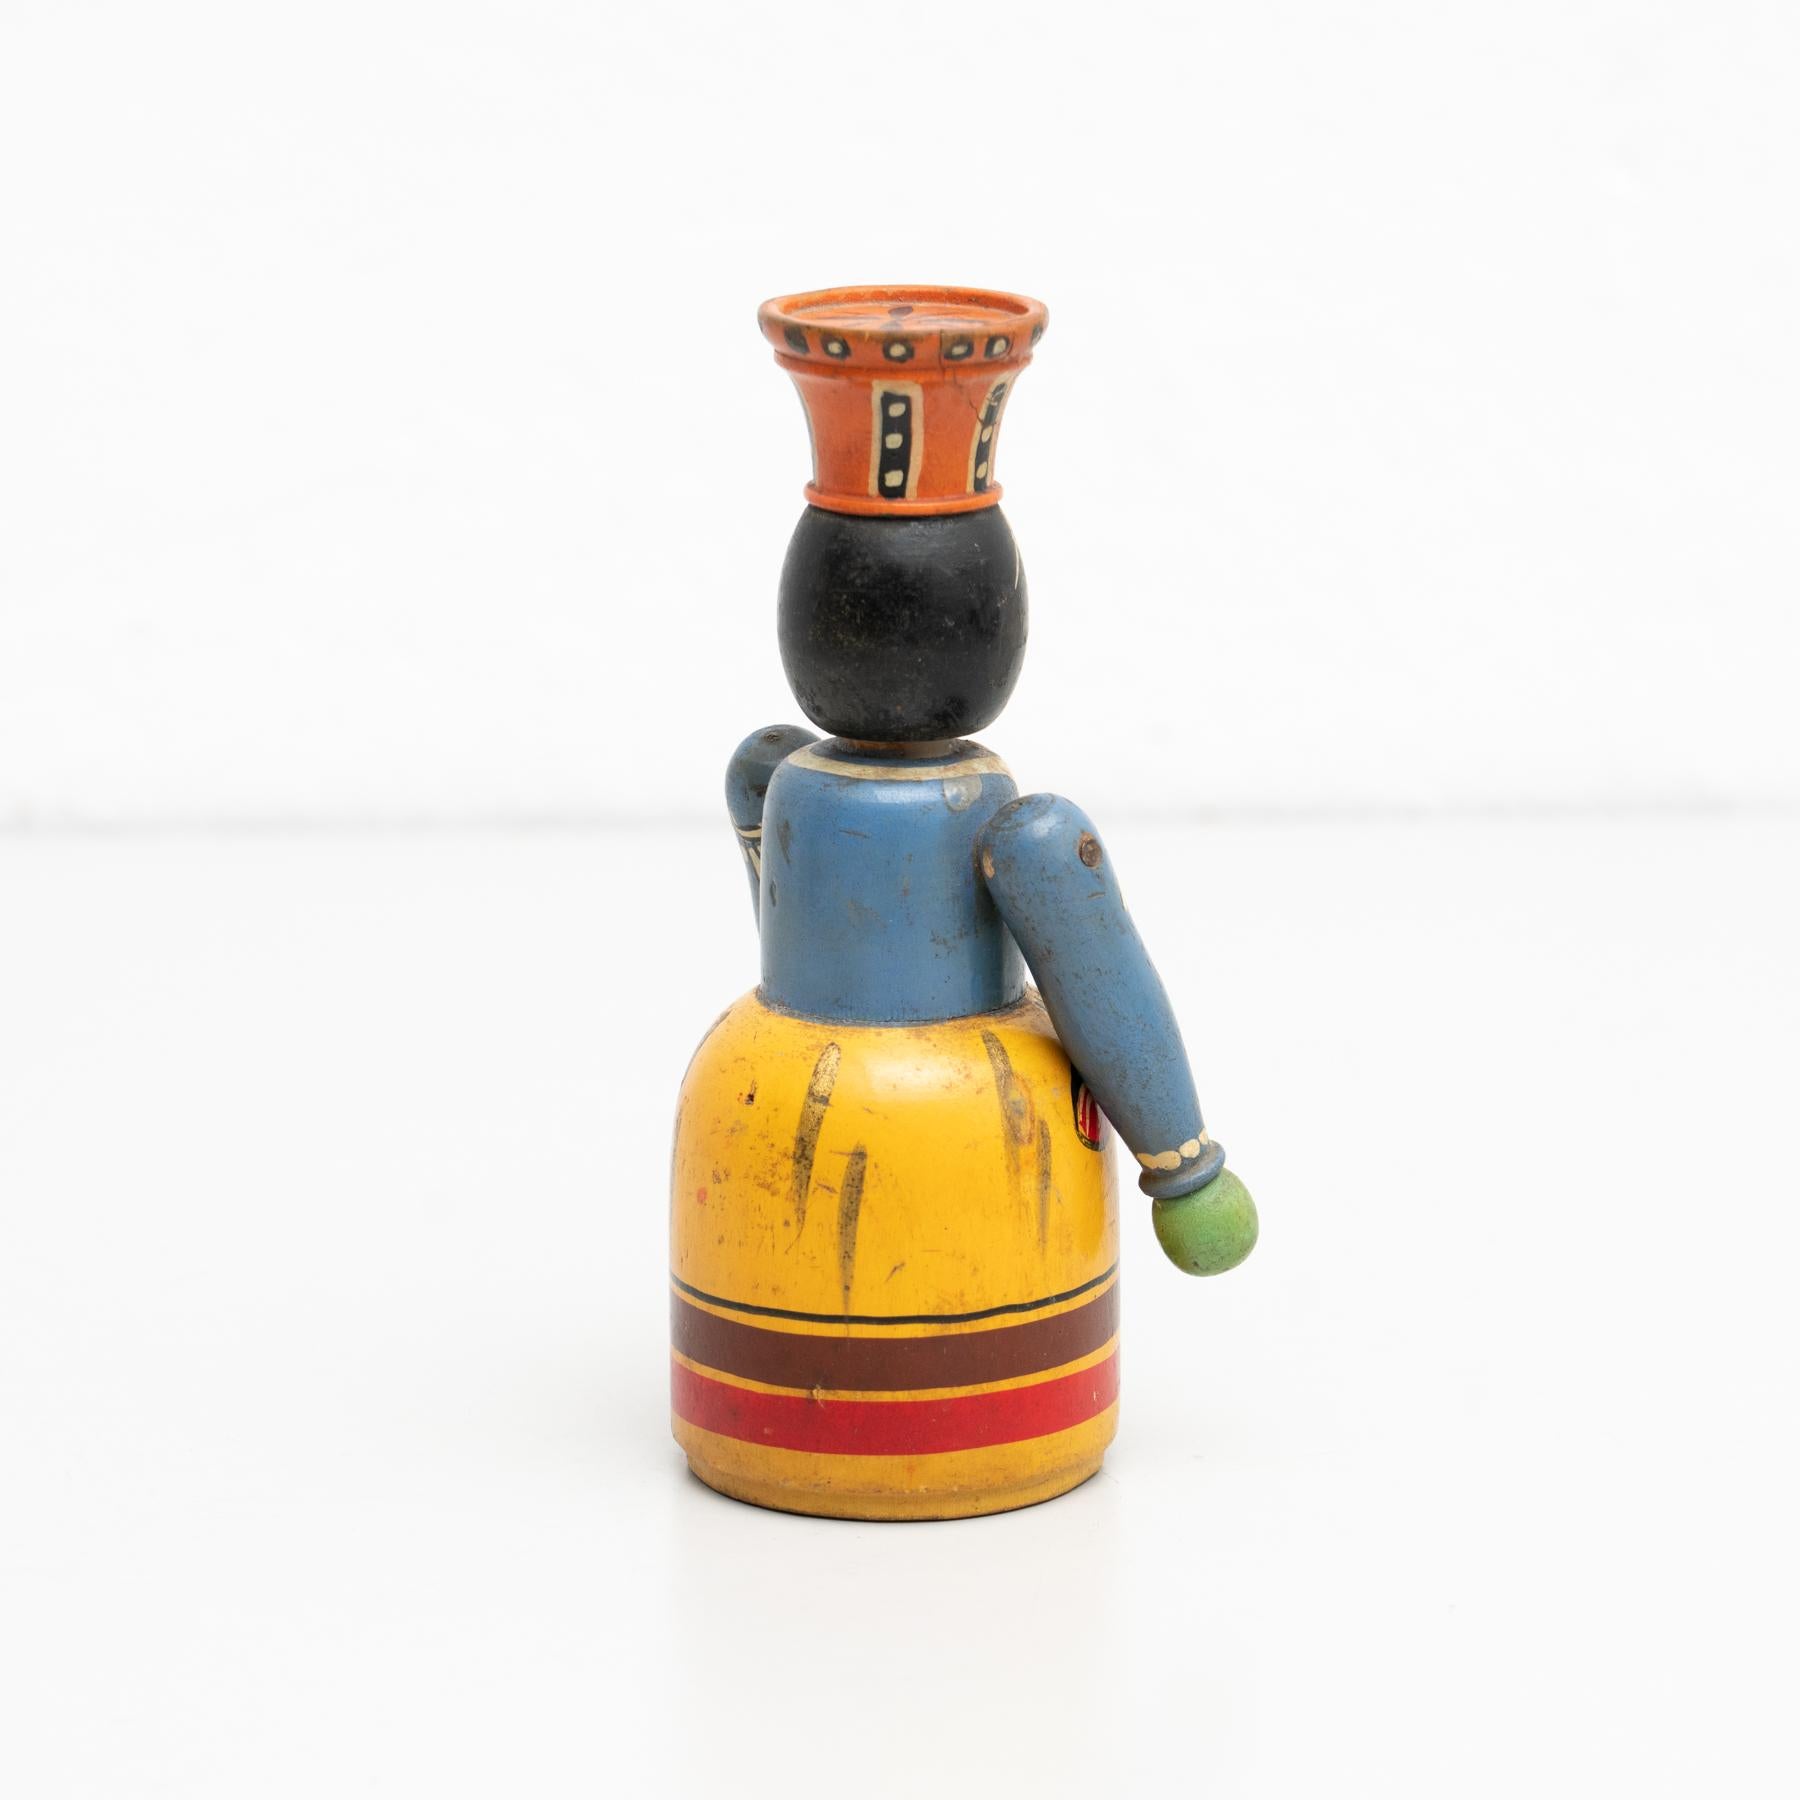 Vintage Hand-Painted Wooden Figure 5